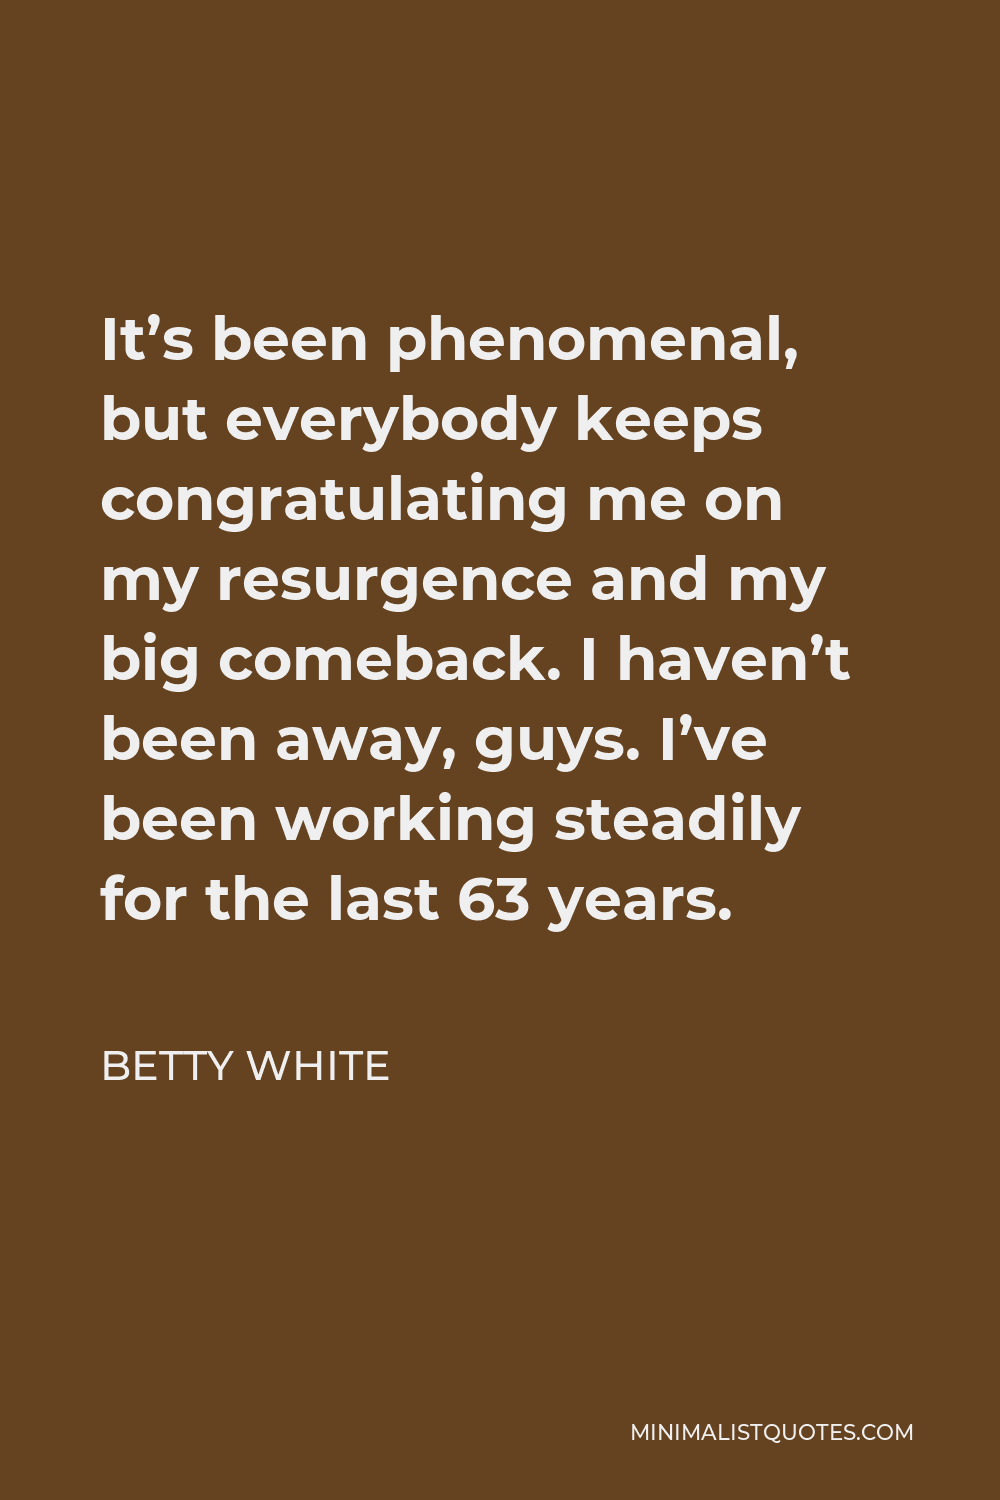 Betty White Quote - It’s been phenomenal, but everybody keeps congratulating me on my resurgence and my big comeback. I haven’t been away, guys. I’ve been working steadily for the last 63 years.